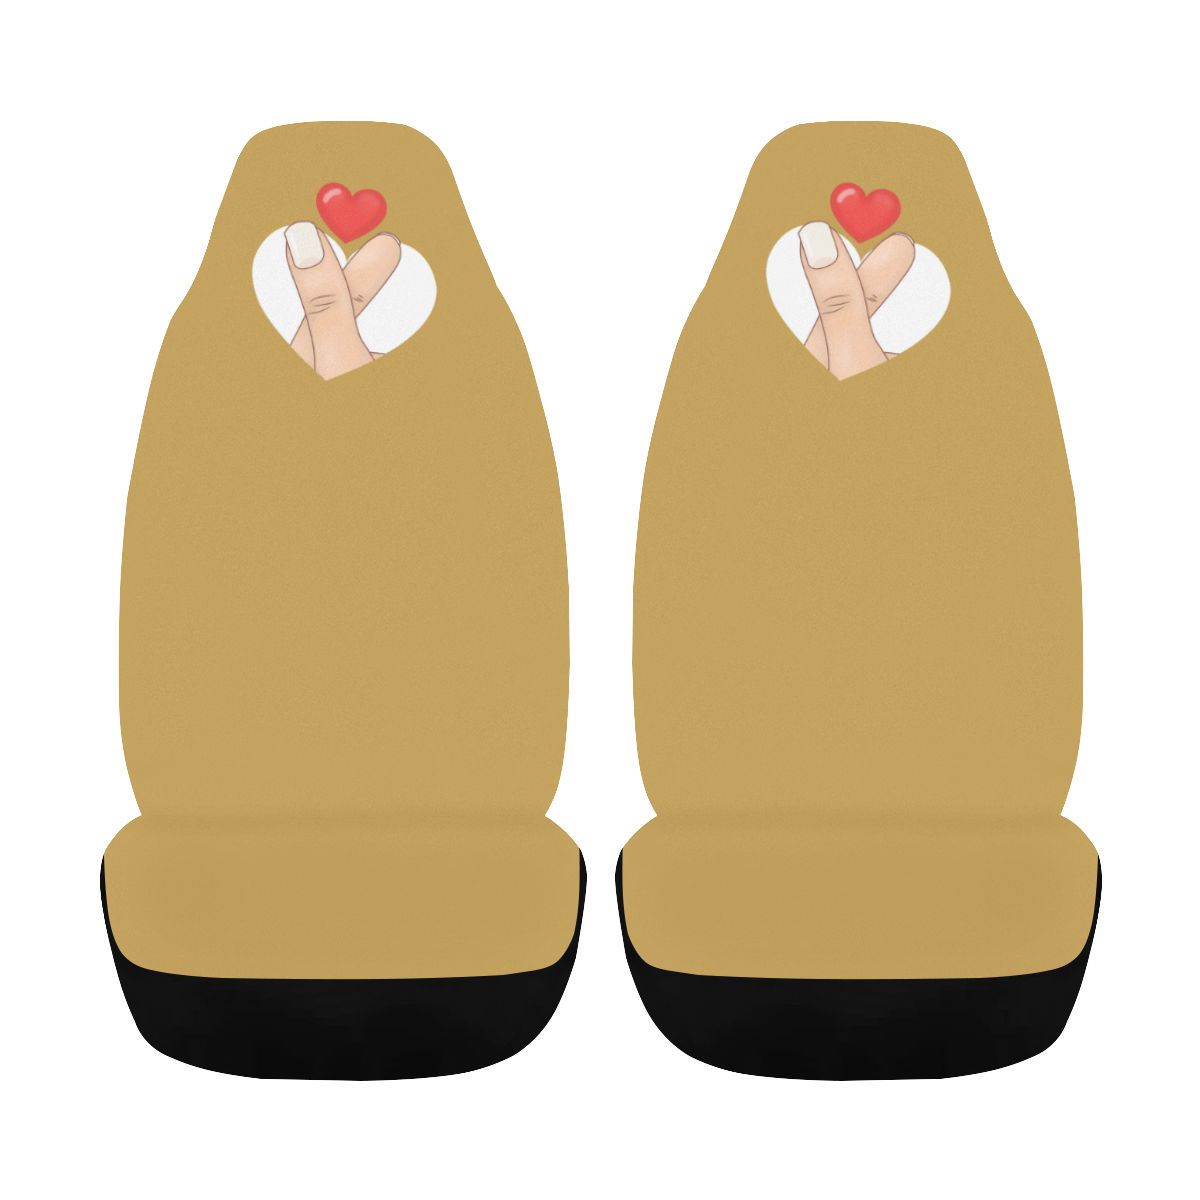 Hand With Finger Heart / Gold Car Seat Cover Airbag Compatible (Set of 2)